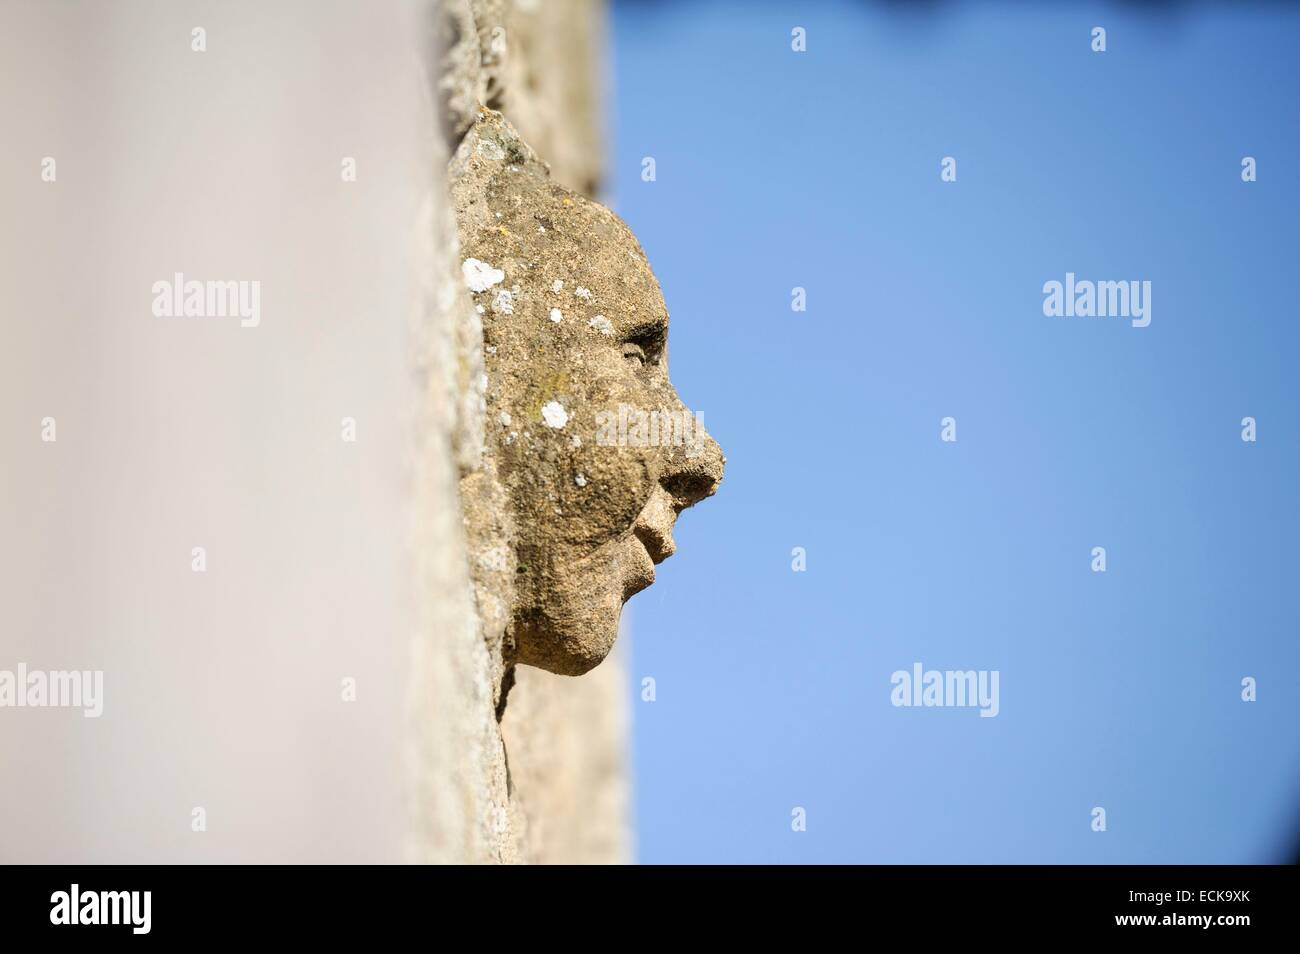 France, Ardennes, Launois sur Vence, horses' post office dating from the 17th century, carving of a face on the entrance wall Stock Photo